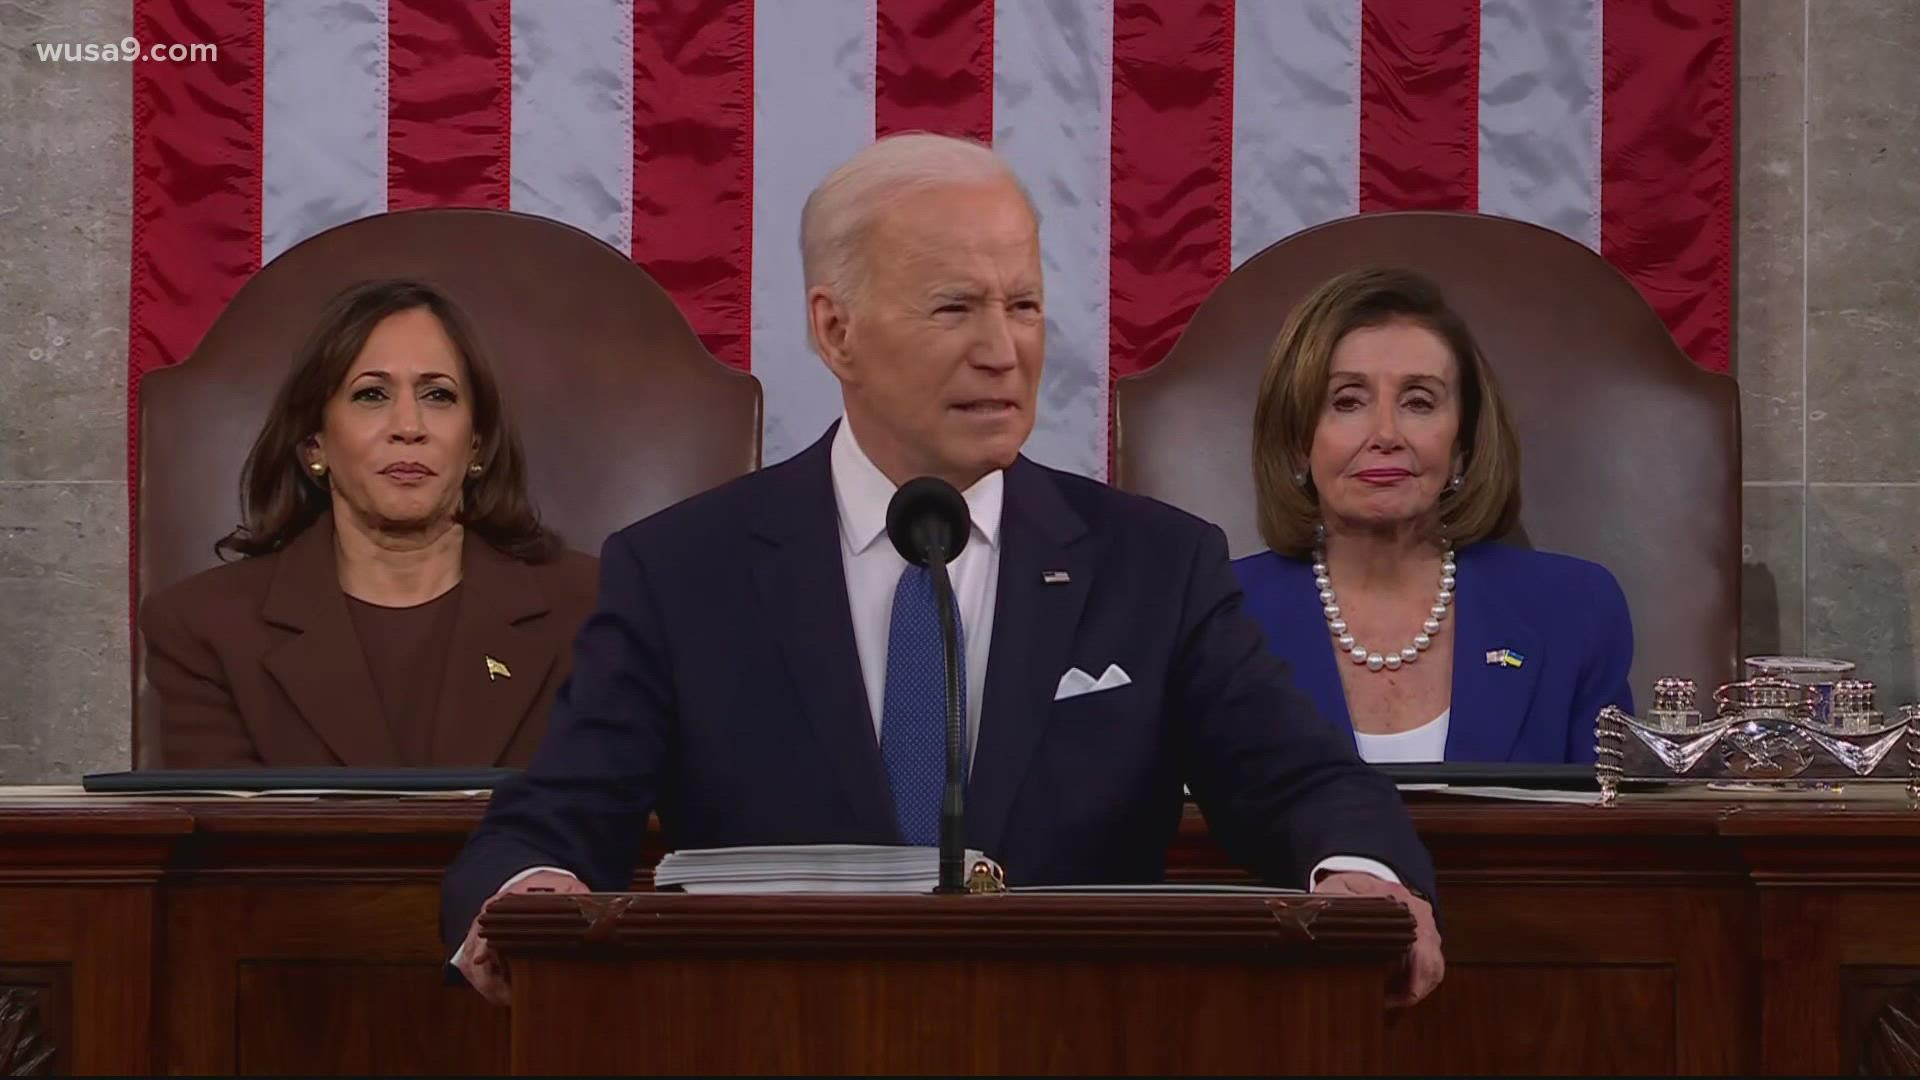 A look at President Joe Biden's first State of the Union Address since taking office.